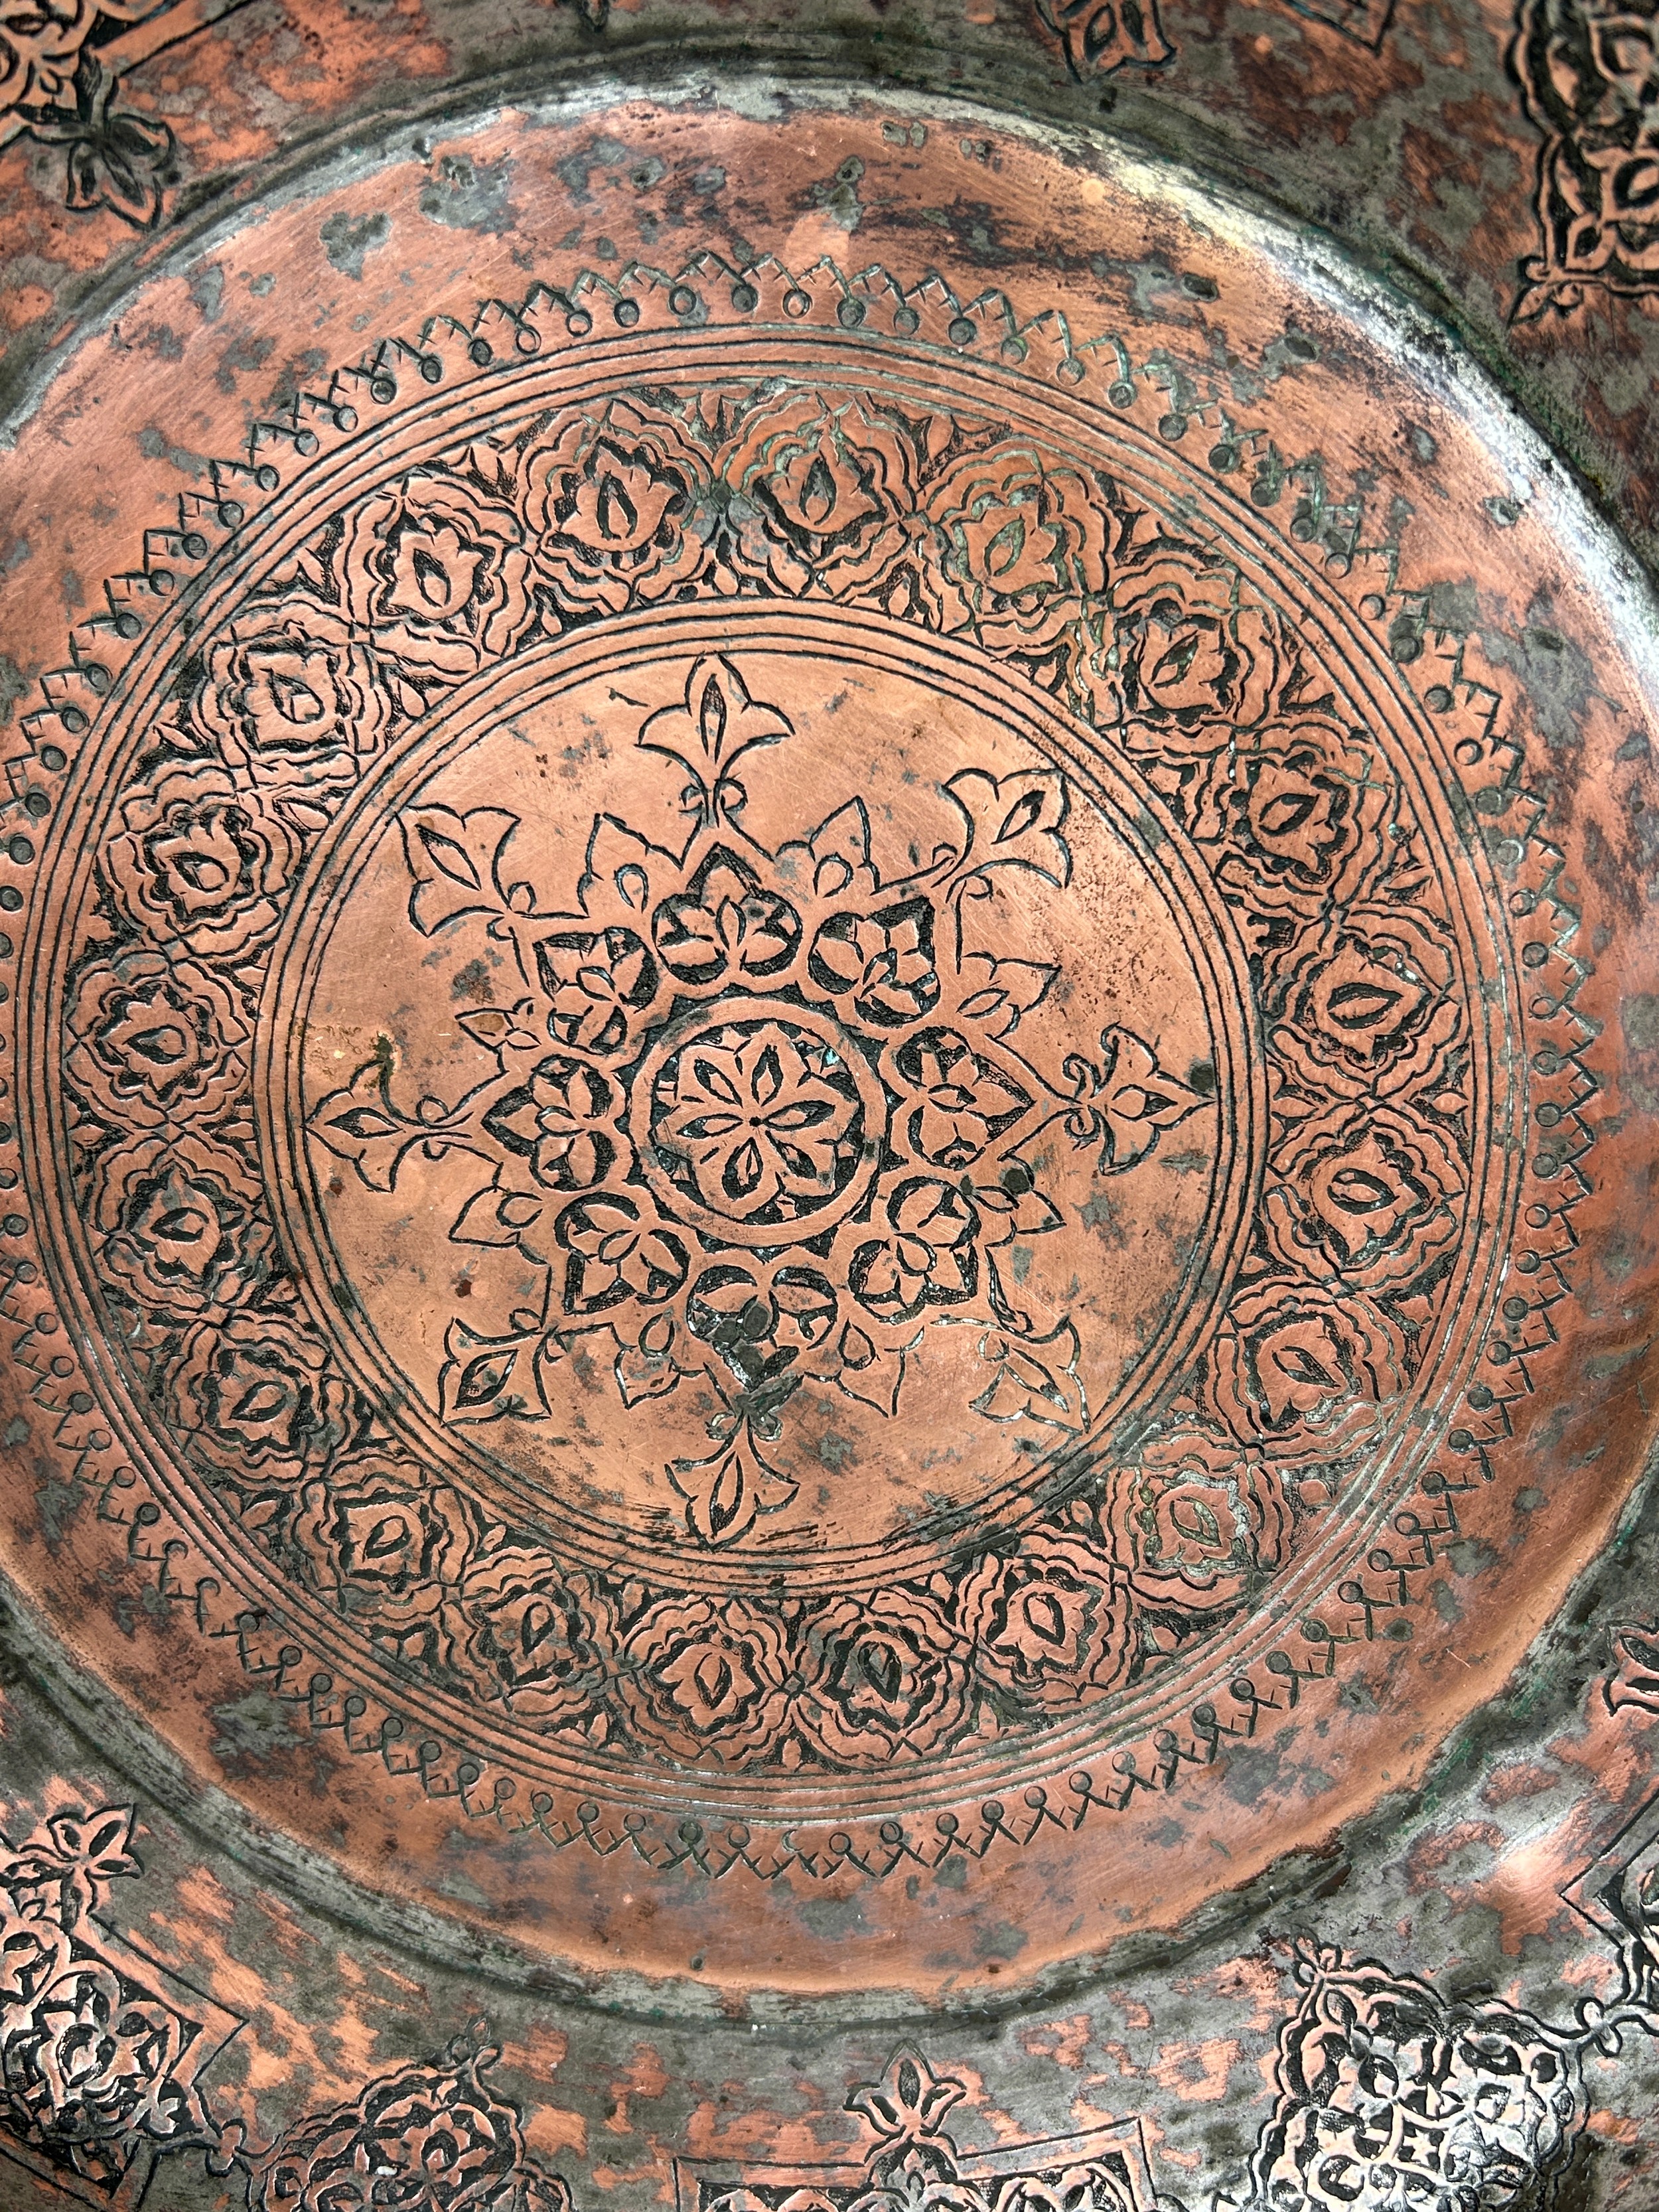 A SAFAVID PERSIAN ENGRAVED BOWL, Possibly 18th century. 34cm x 8cm - Image 3 of 3